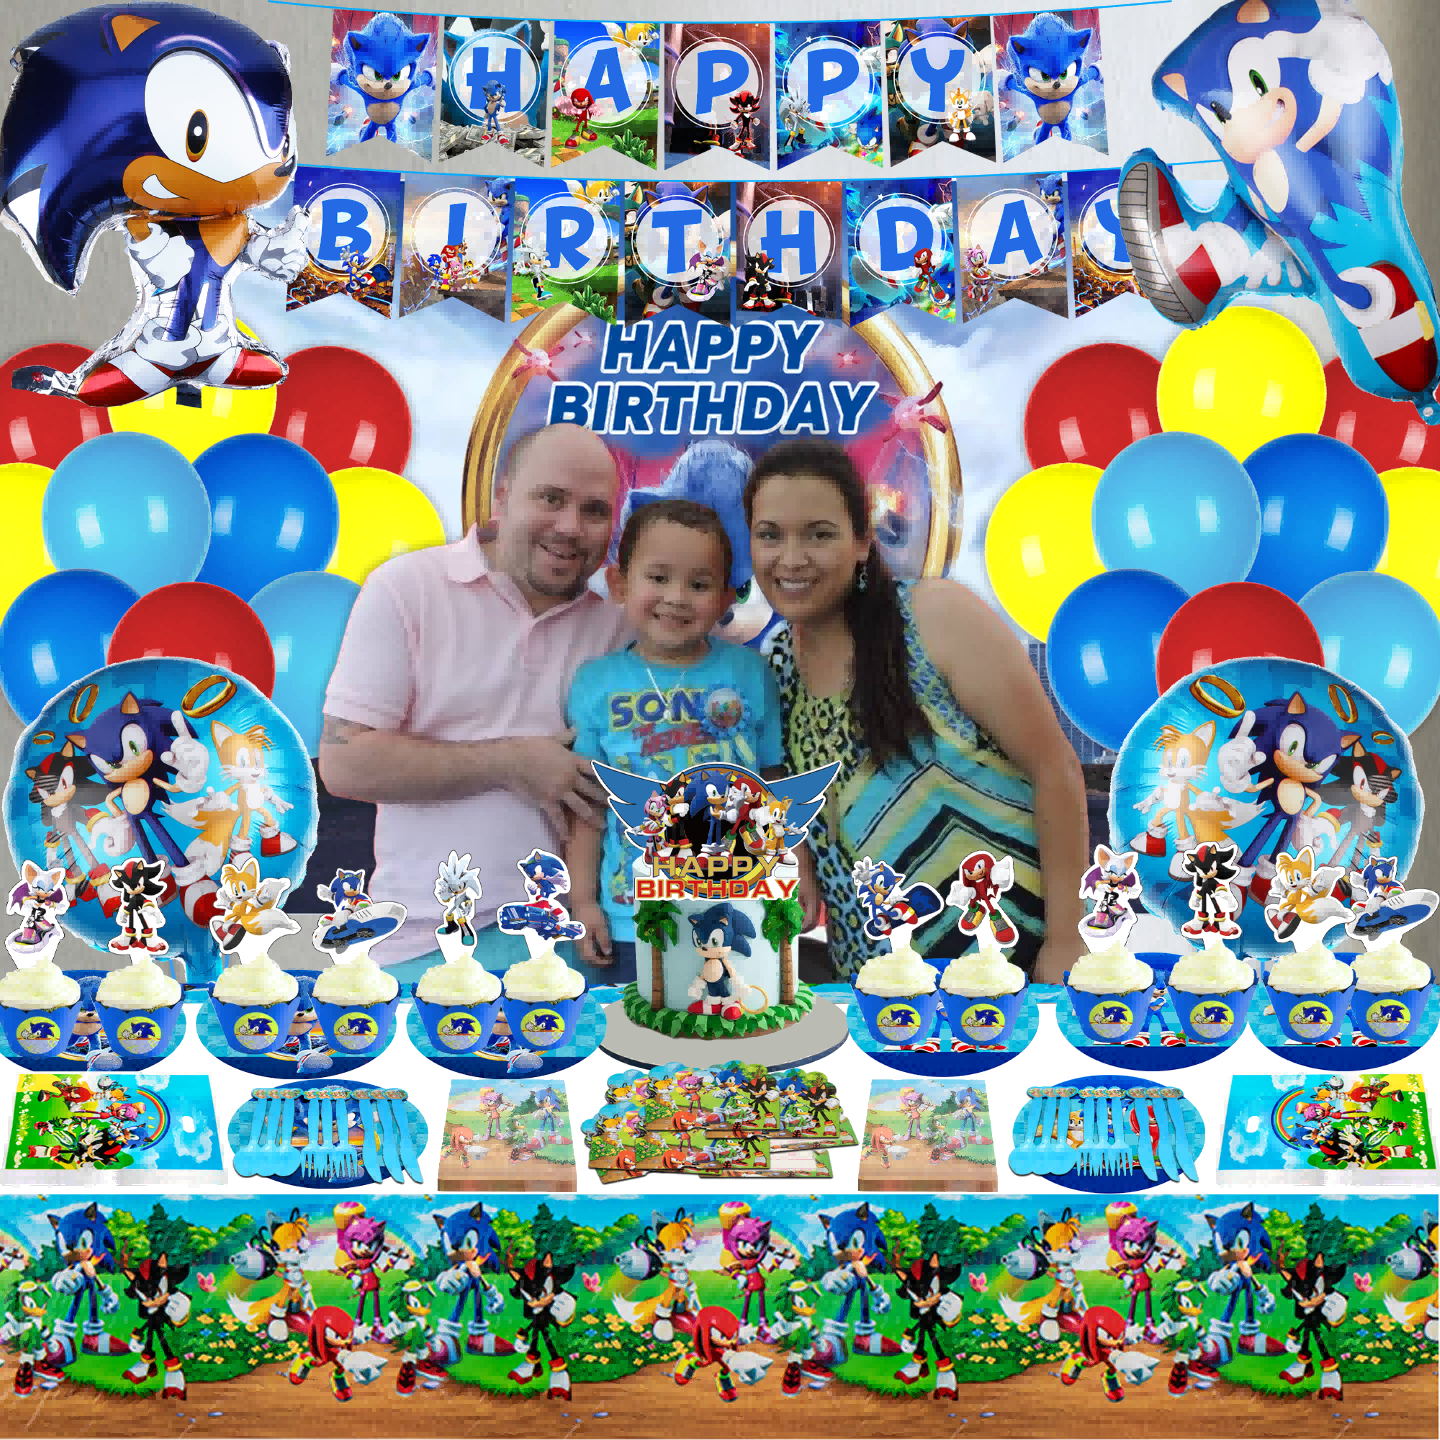 186pcs Sonic Birthday Party Supplies, Sonic Party Decorations, Includes  Sonic Theme Banner,Tablecloth,Plates,Napkins,Knives,Forks,Spoons,Cake